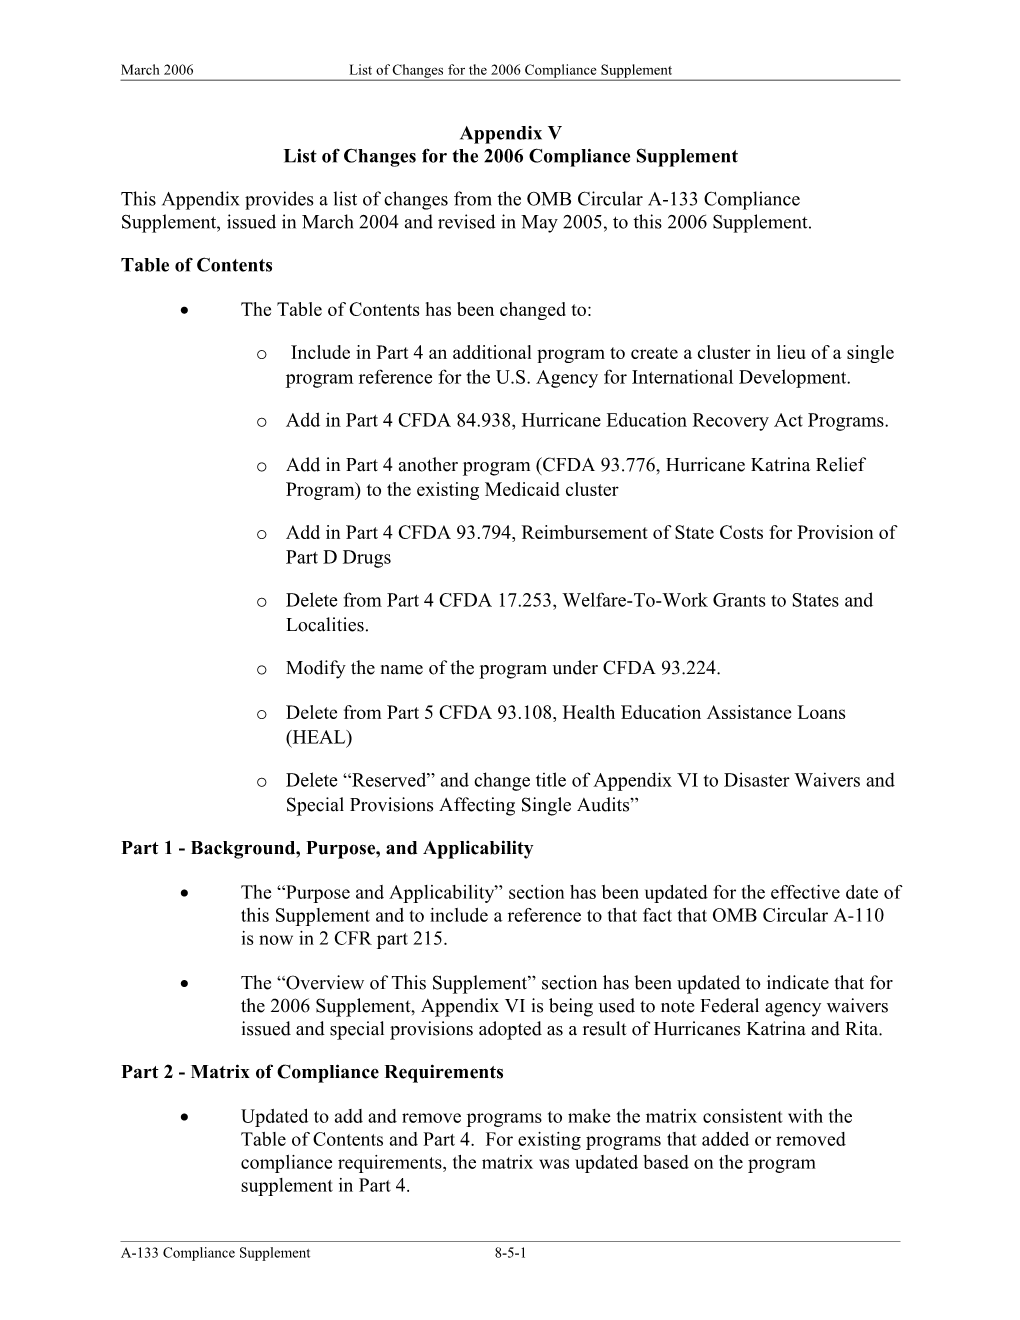 List of Changes for the 2006 Compliance Supplement